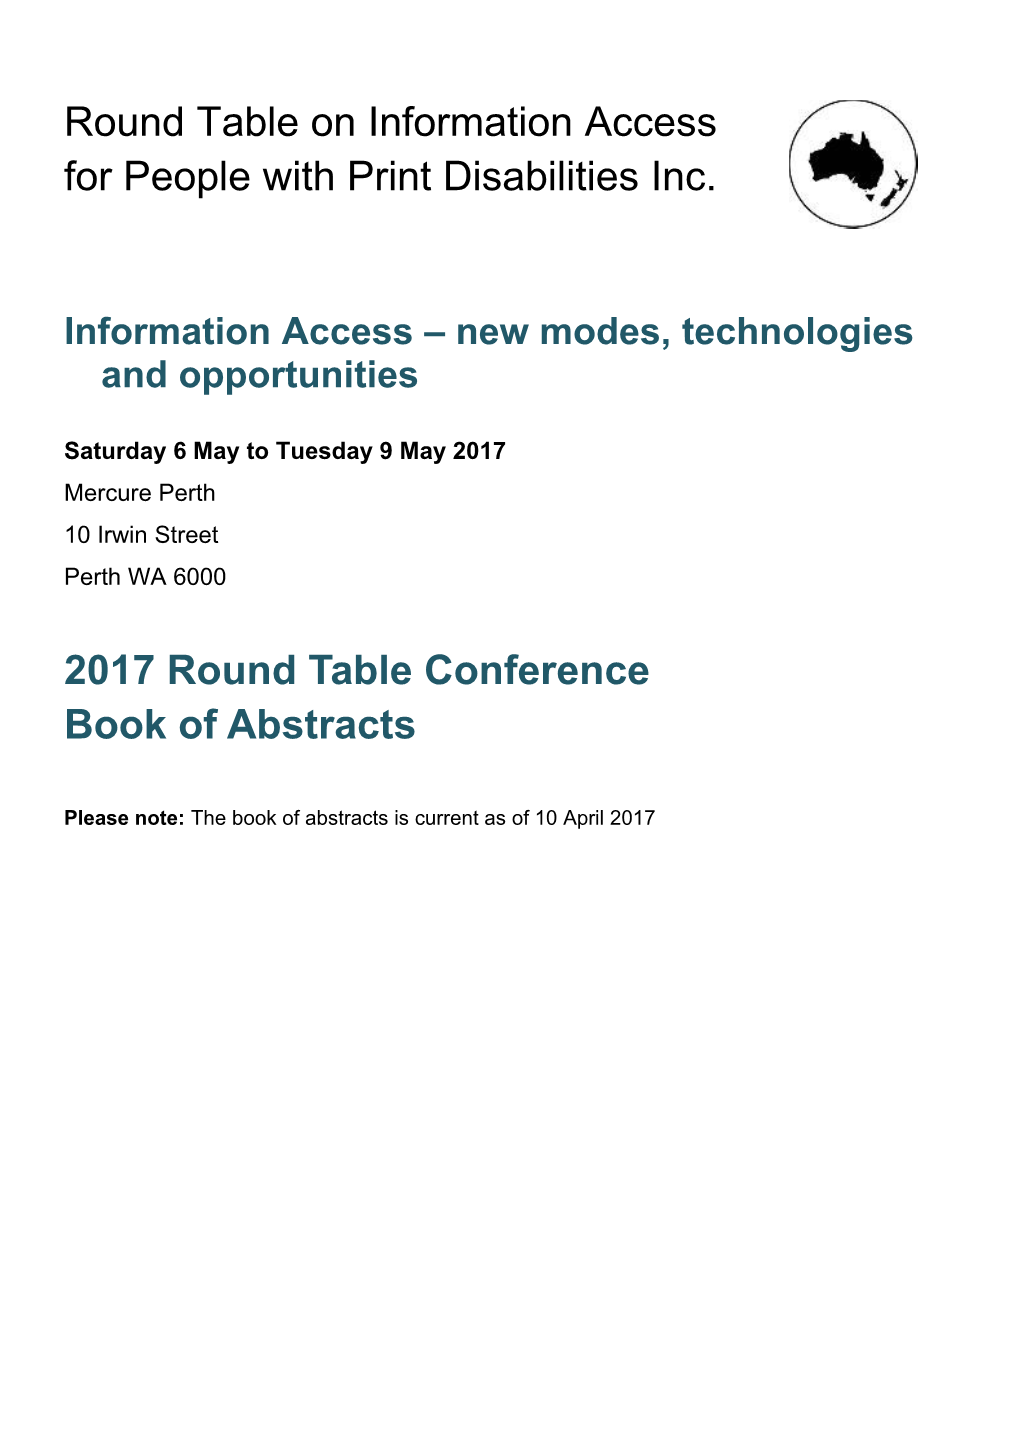 Information Access New Modes, Technologies and Opportunities